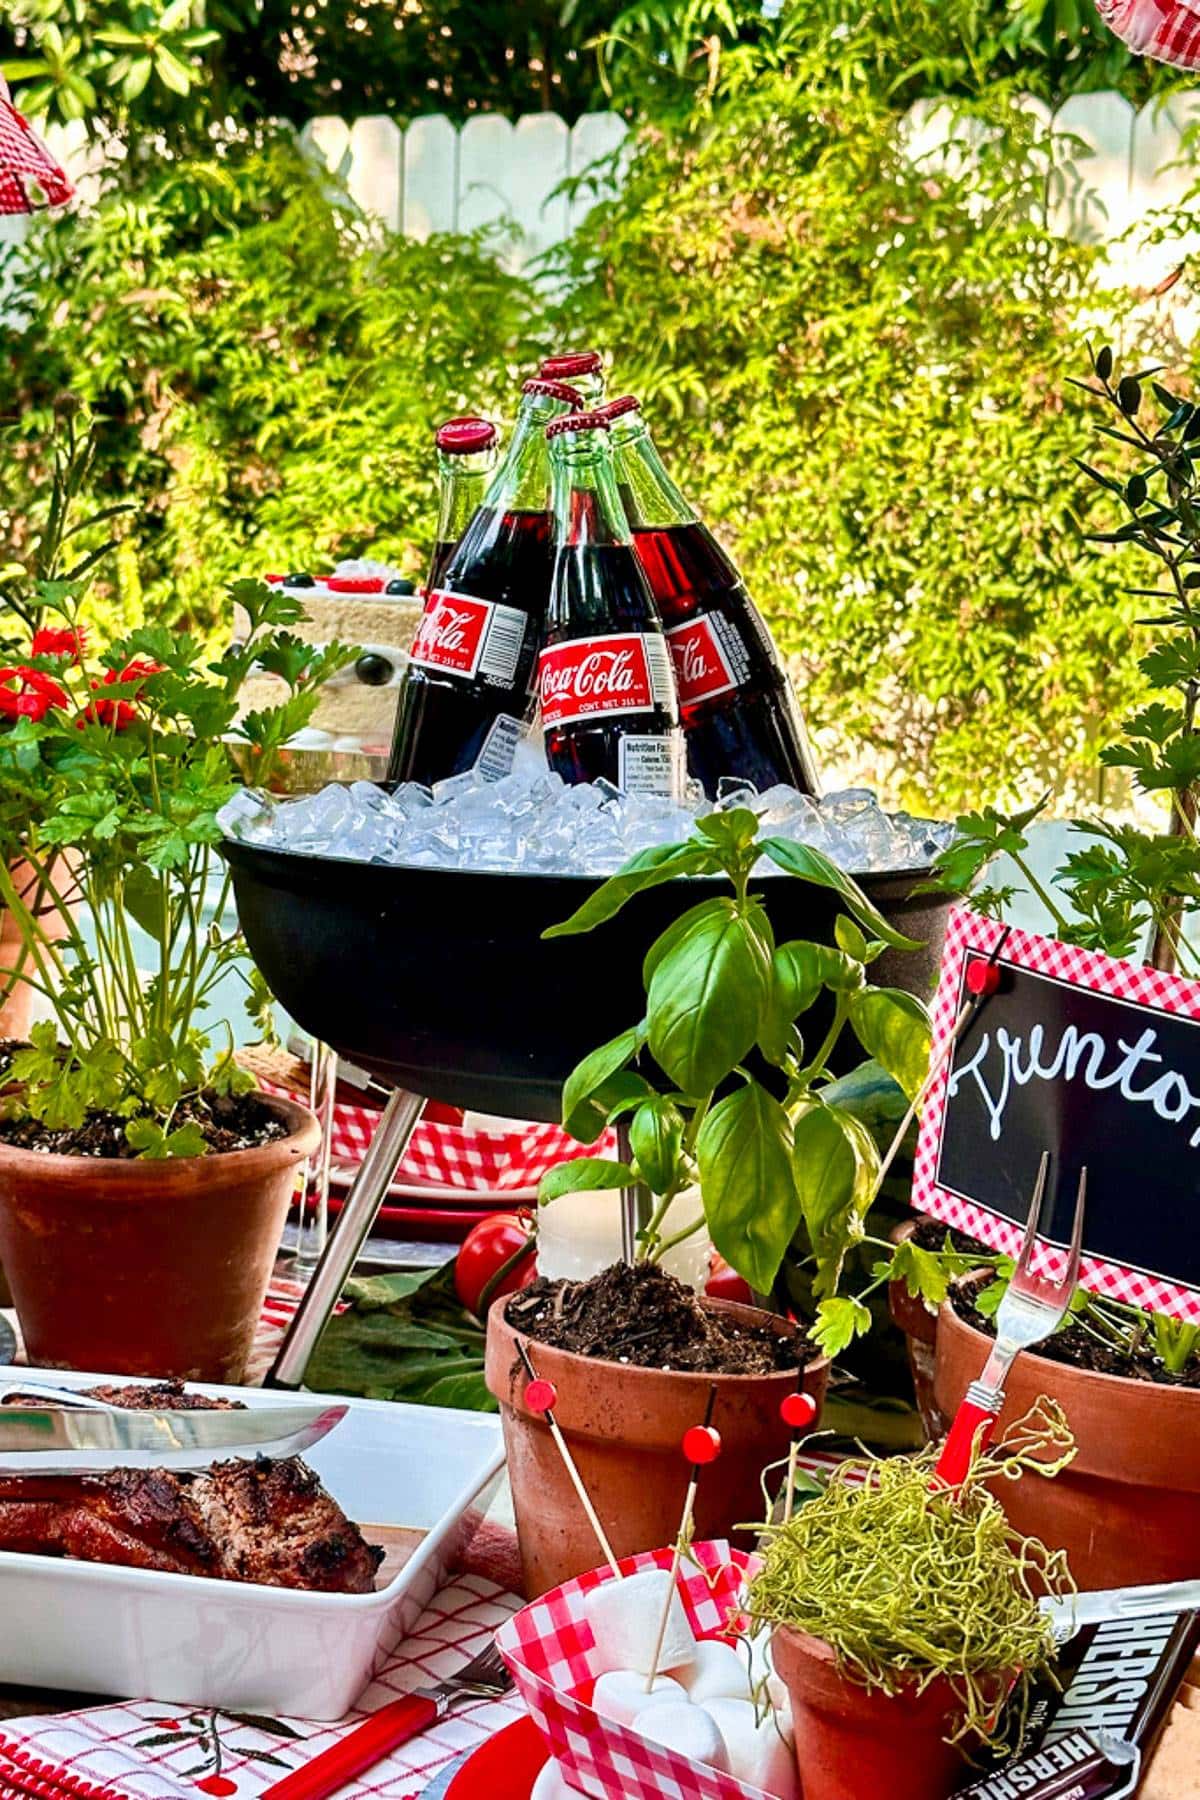 COKE BOTTLES SIT IN A SMALL BBQ WITH DRIED ICE AS THE THEME FOR THE PARTY IS SMOKING BBQ.